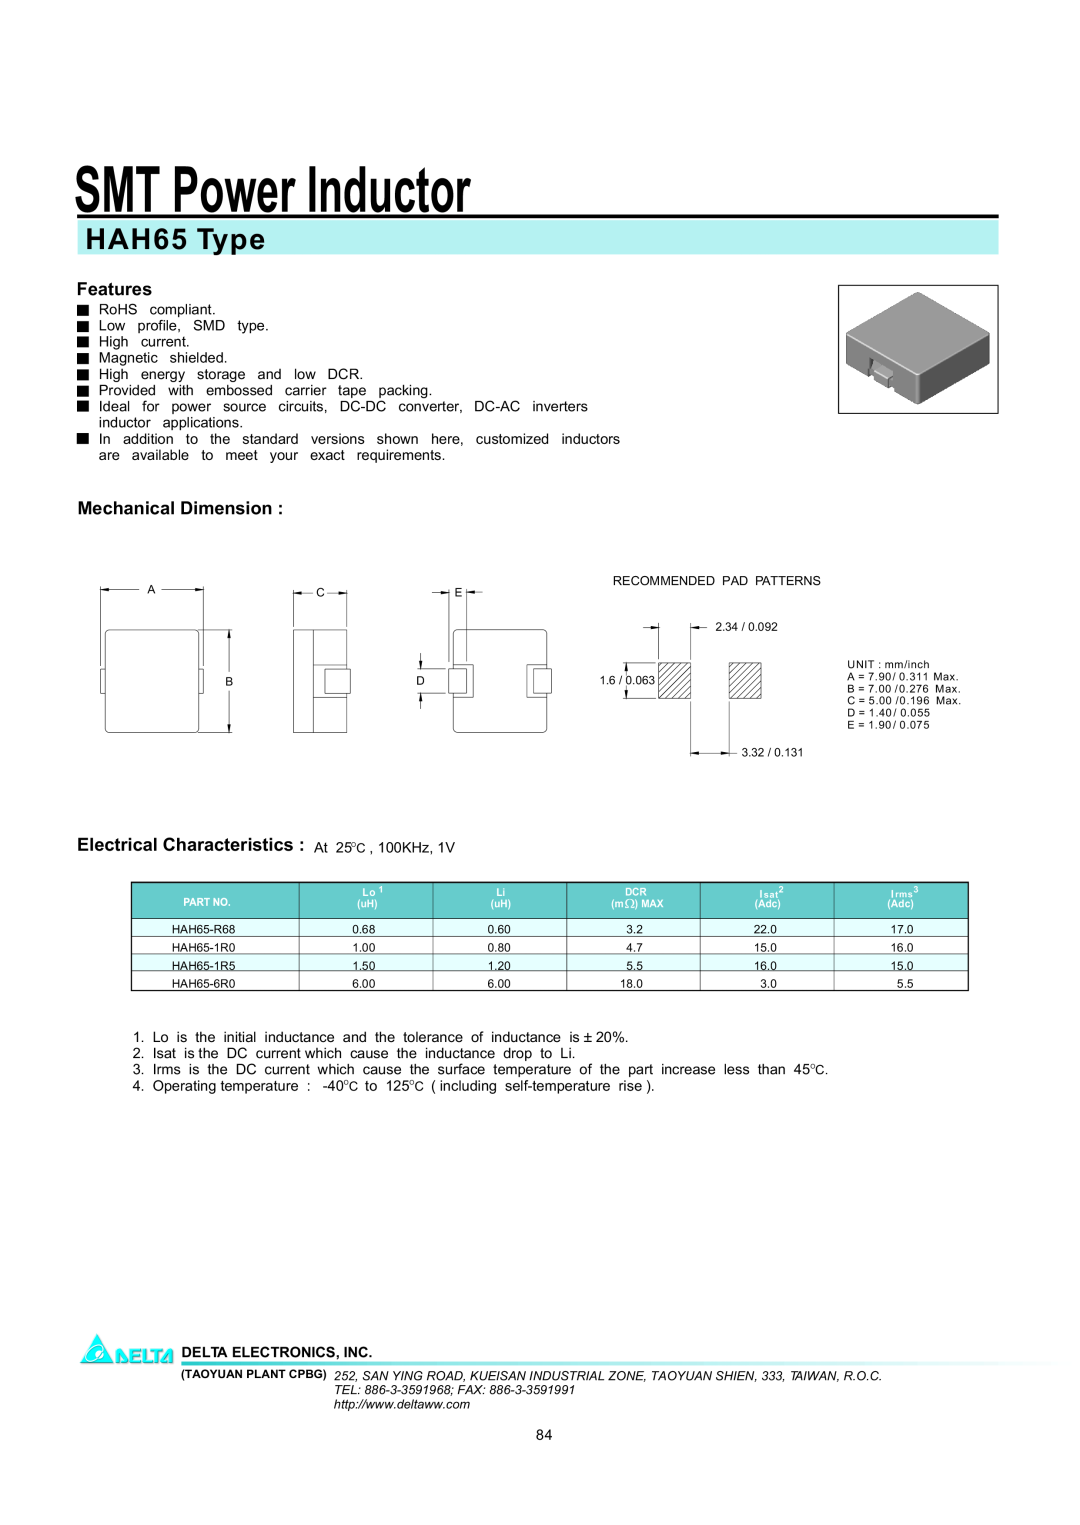 Delta Electronics manual SMT Power Inductor, HAH65 Type, Features, Mechanical Dimension, Delta Electronics, Inc 